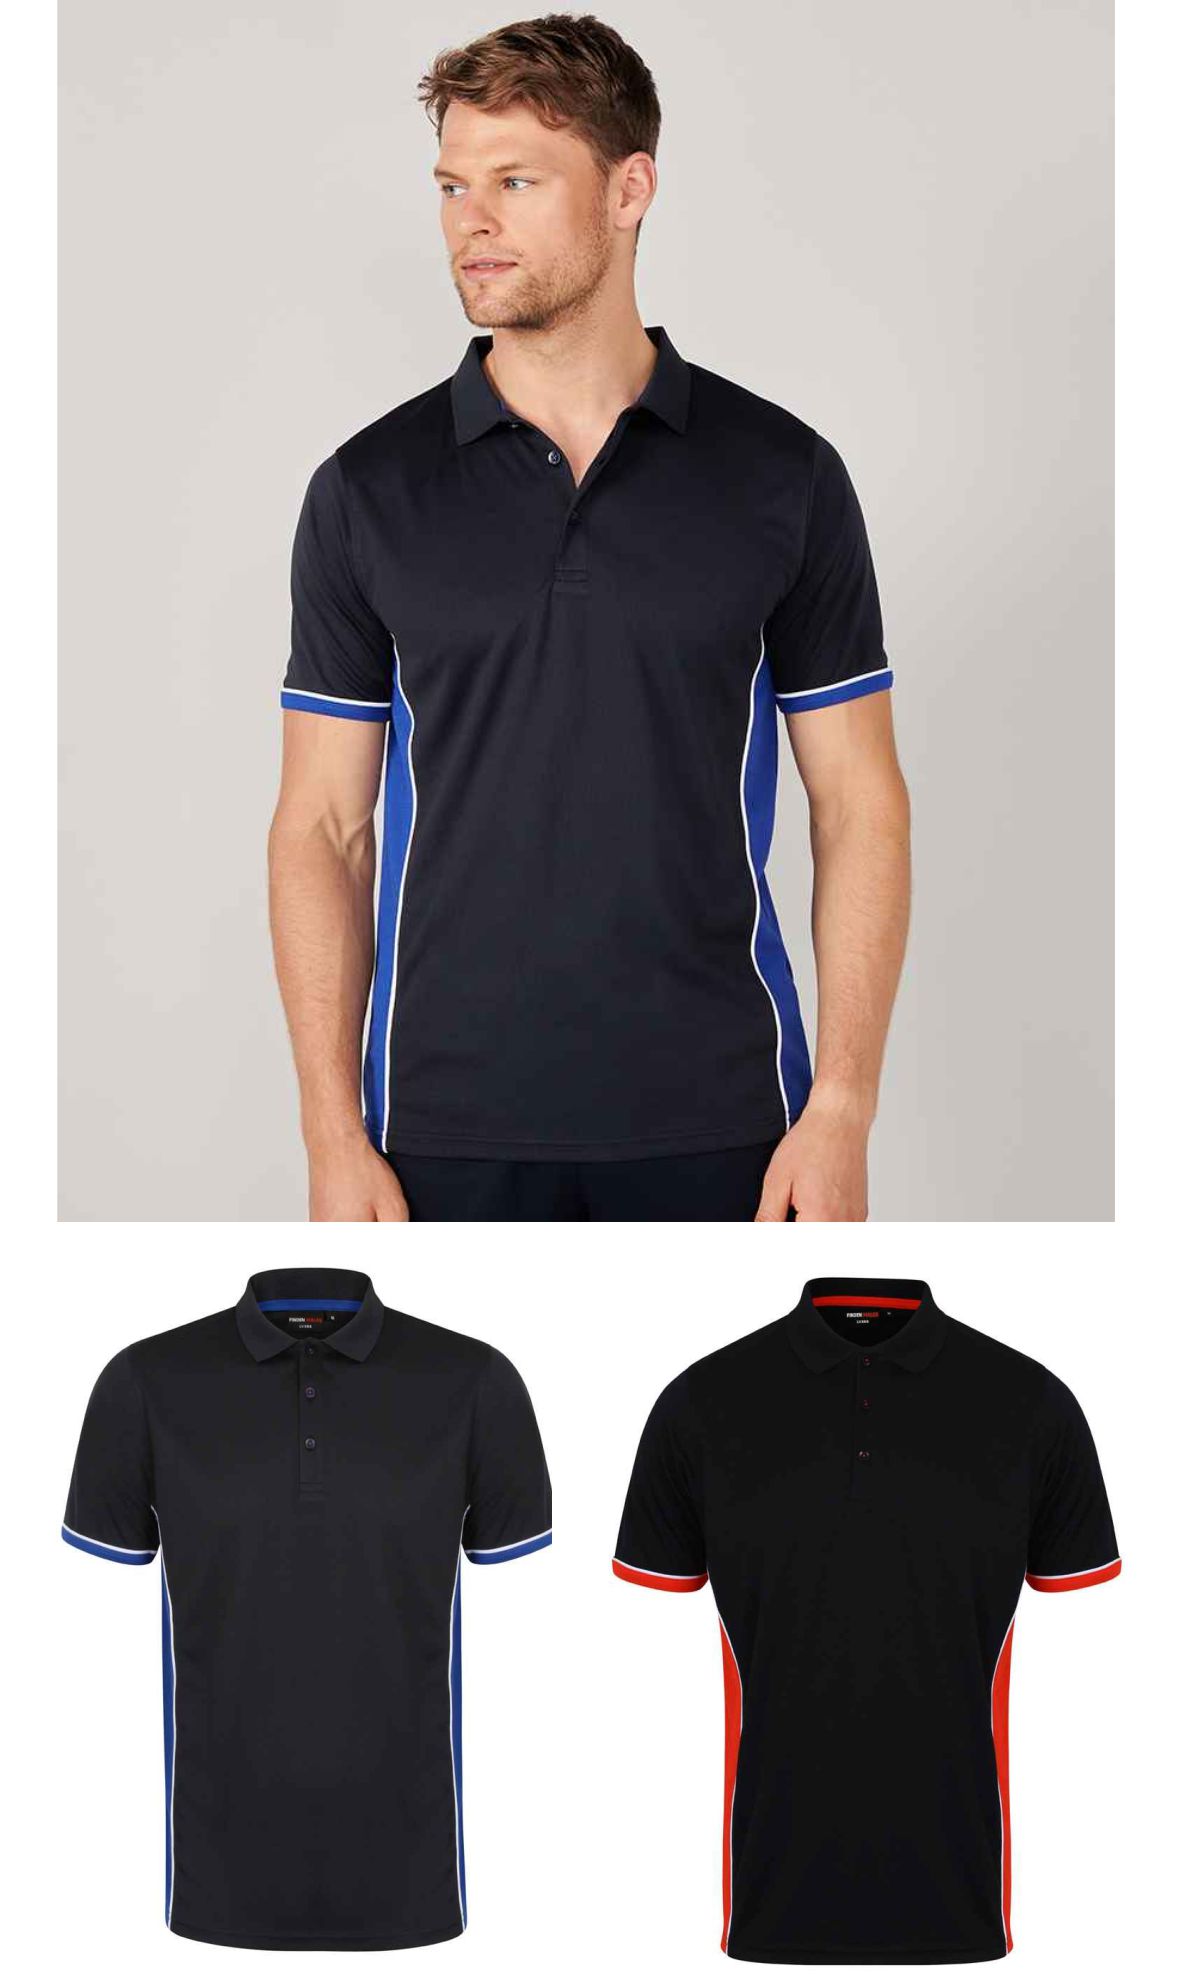 Finden & Hales LV355 Topcool Contrast Polo Shirt